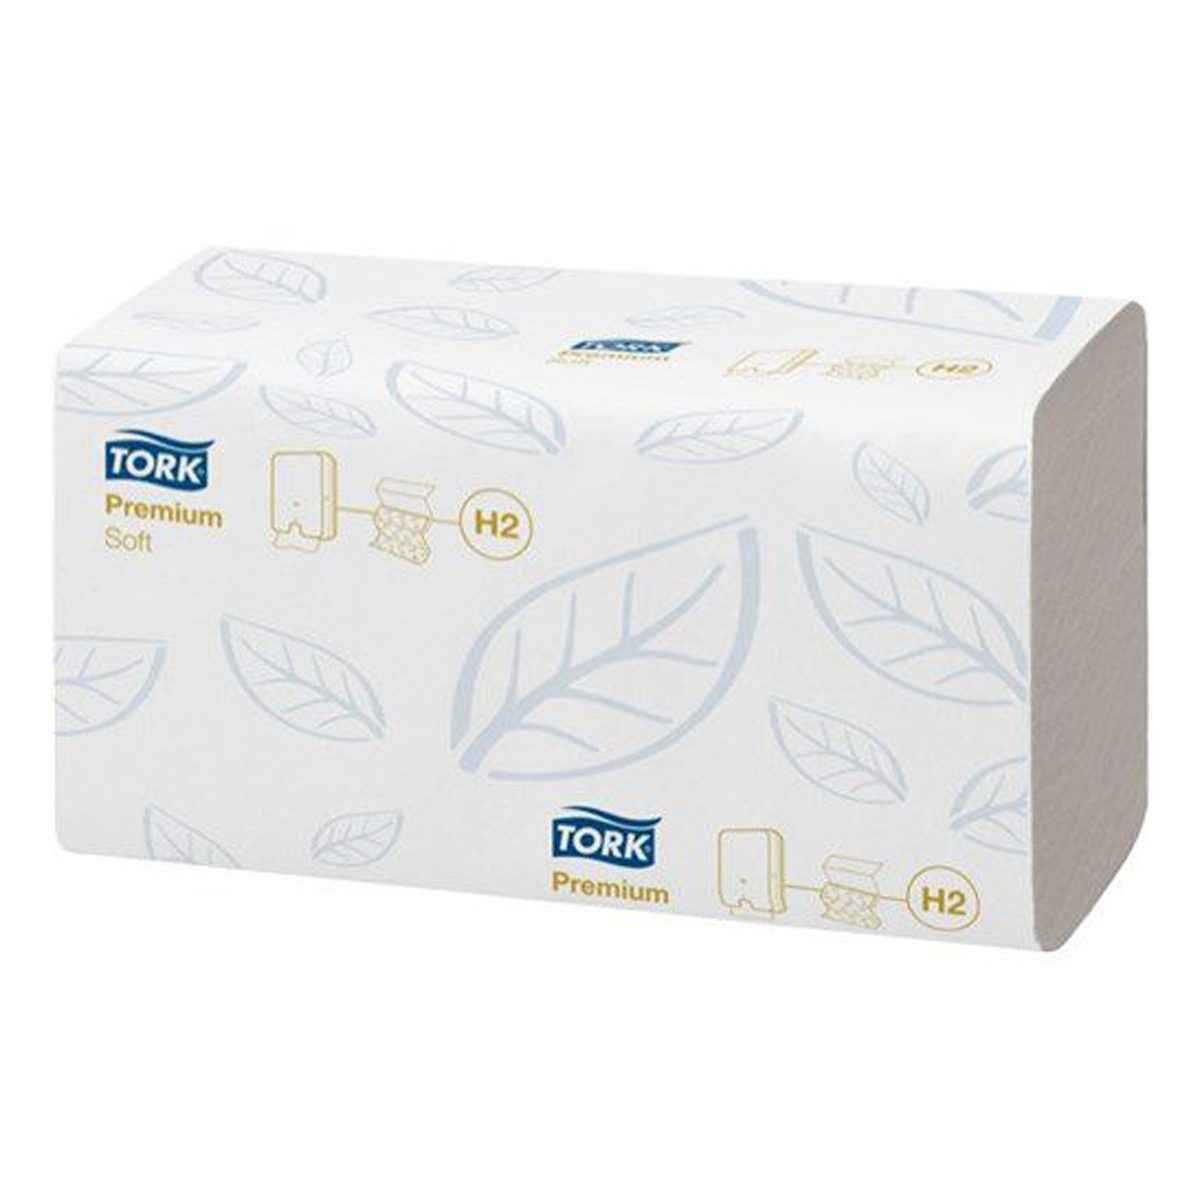 paper-products-paper-towels-tork-soft-multifold-towel-advanced-white-2-ply-h2-180-sheets-21-packs-superior-hand-drying-and-comfort-medium-traffic-washrooms-good-hygiene-vjs-distributors-120289